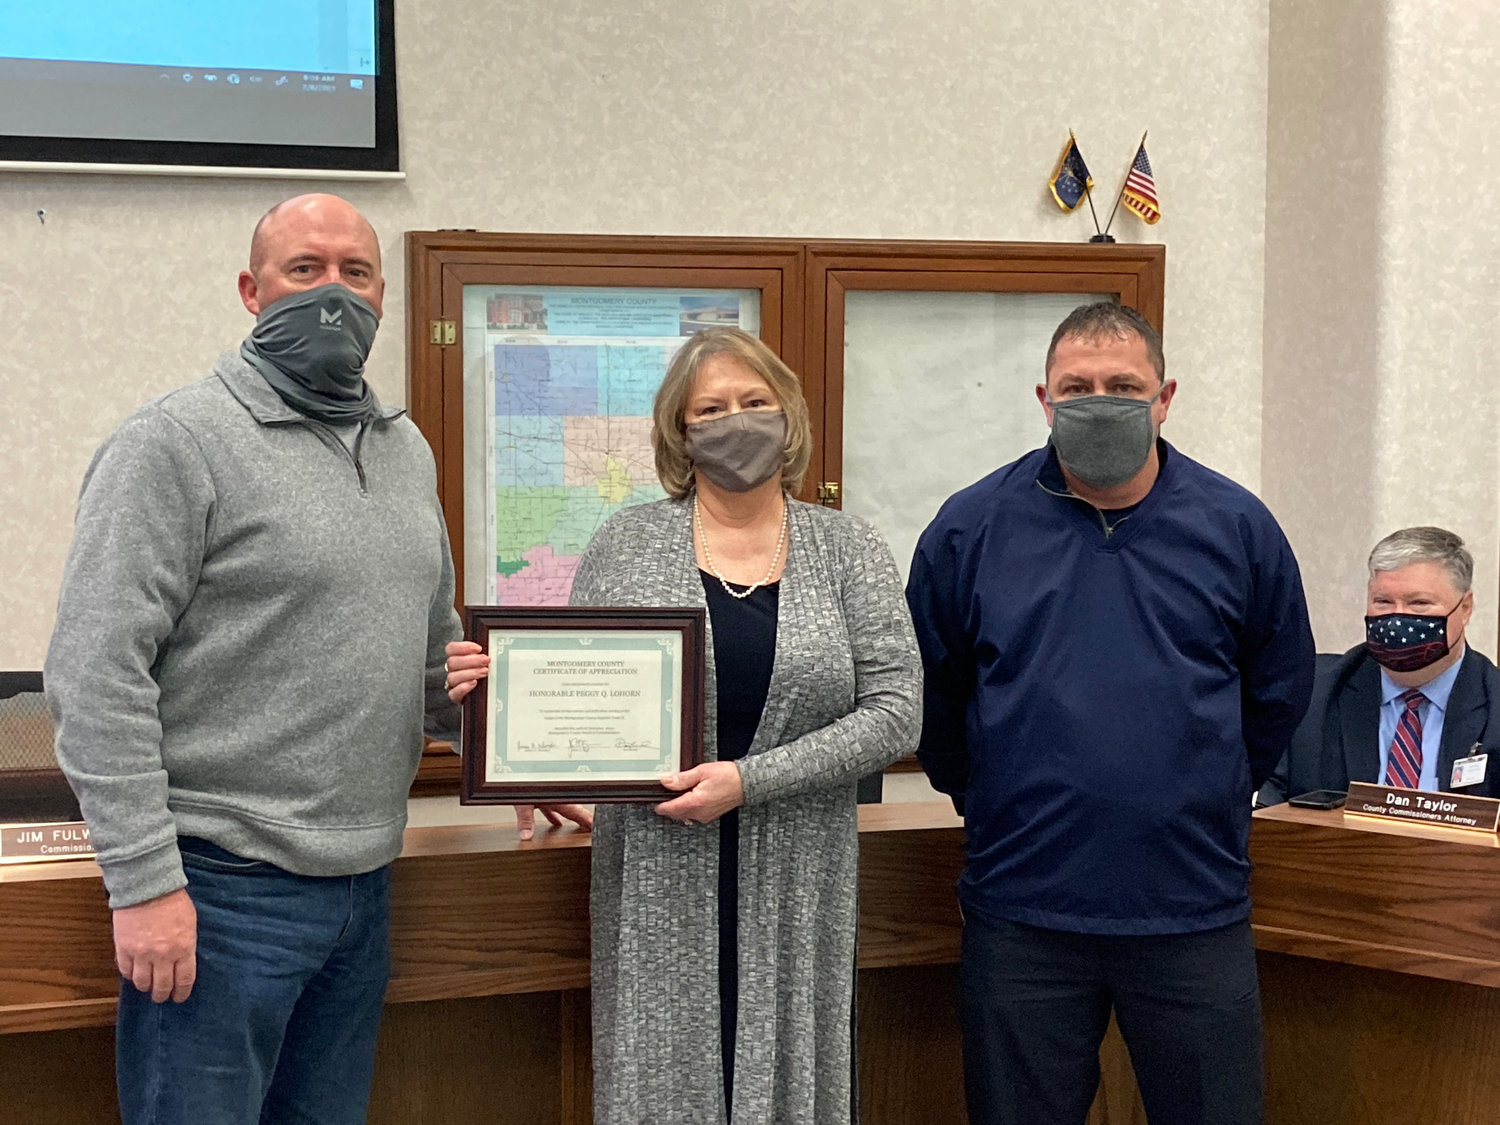 Former Montgomery Superior Court 2 Judge Peggy Lohorn, center, accepts a certificate of appreciation from the Board of Commissioners Monday. Also pictured are commissioners Dan Guard and Jim Fulwider.